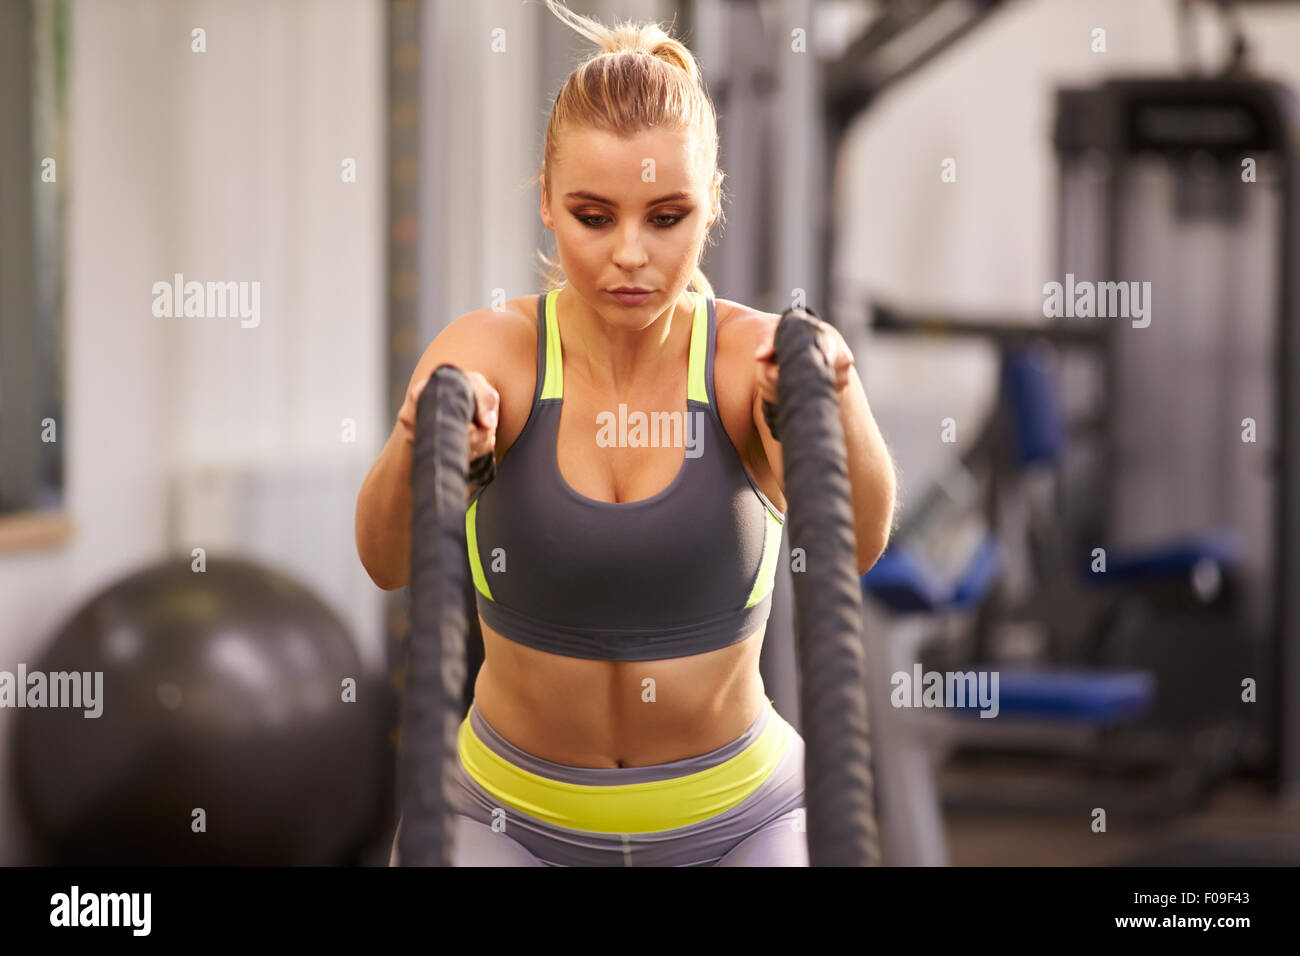 Young woman preparing to work out with battle ropes at a gym Stock Photo